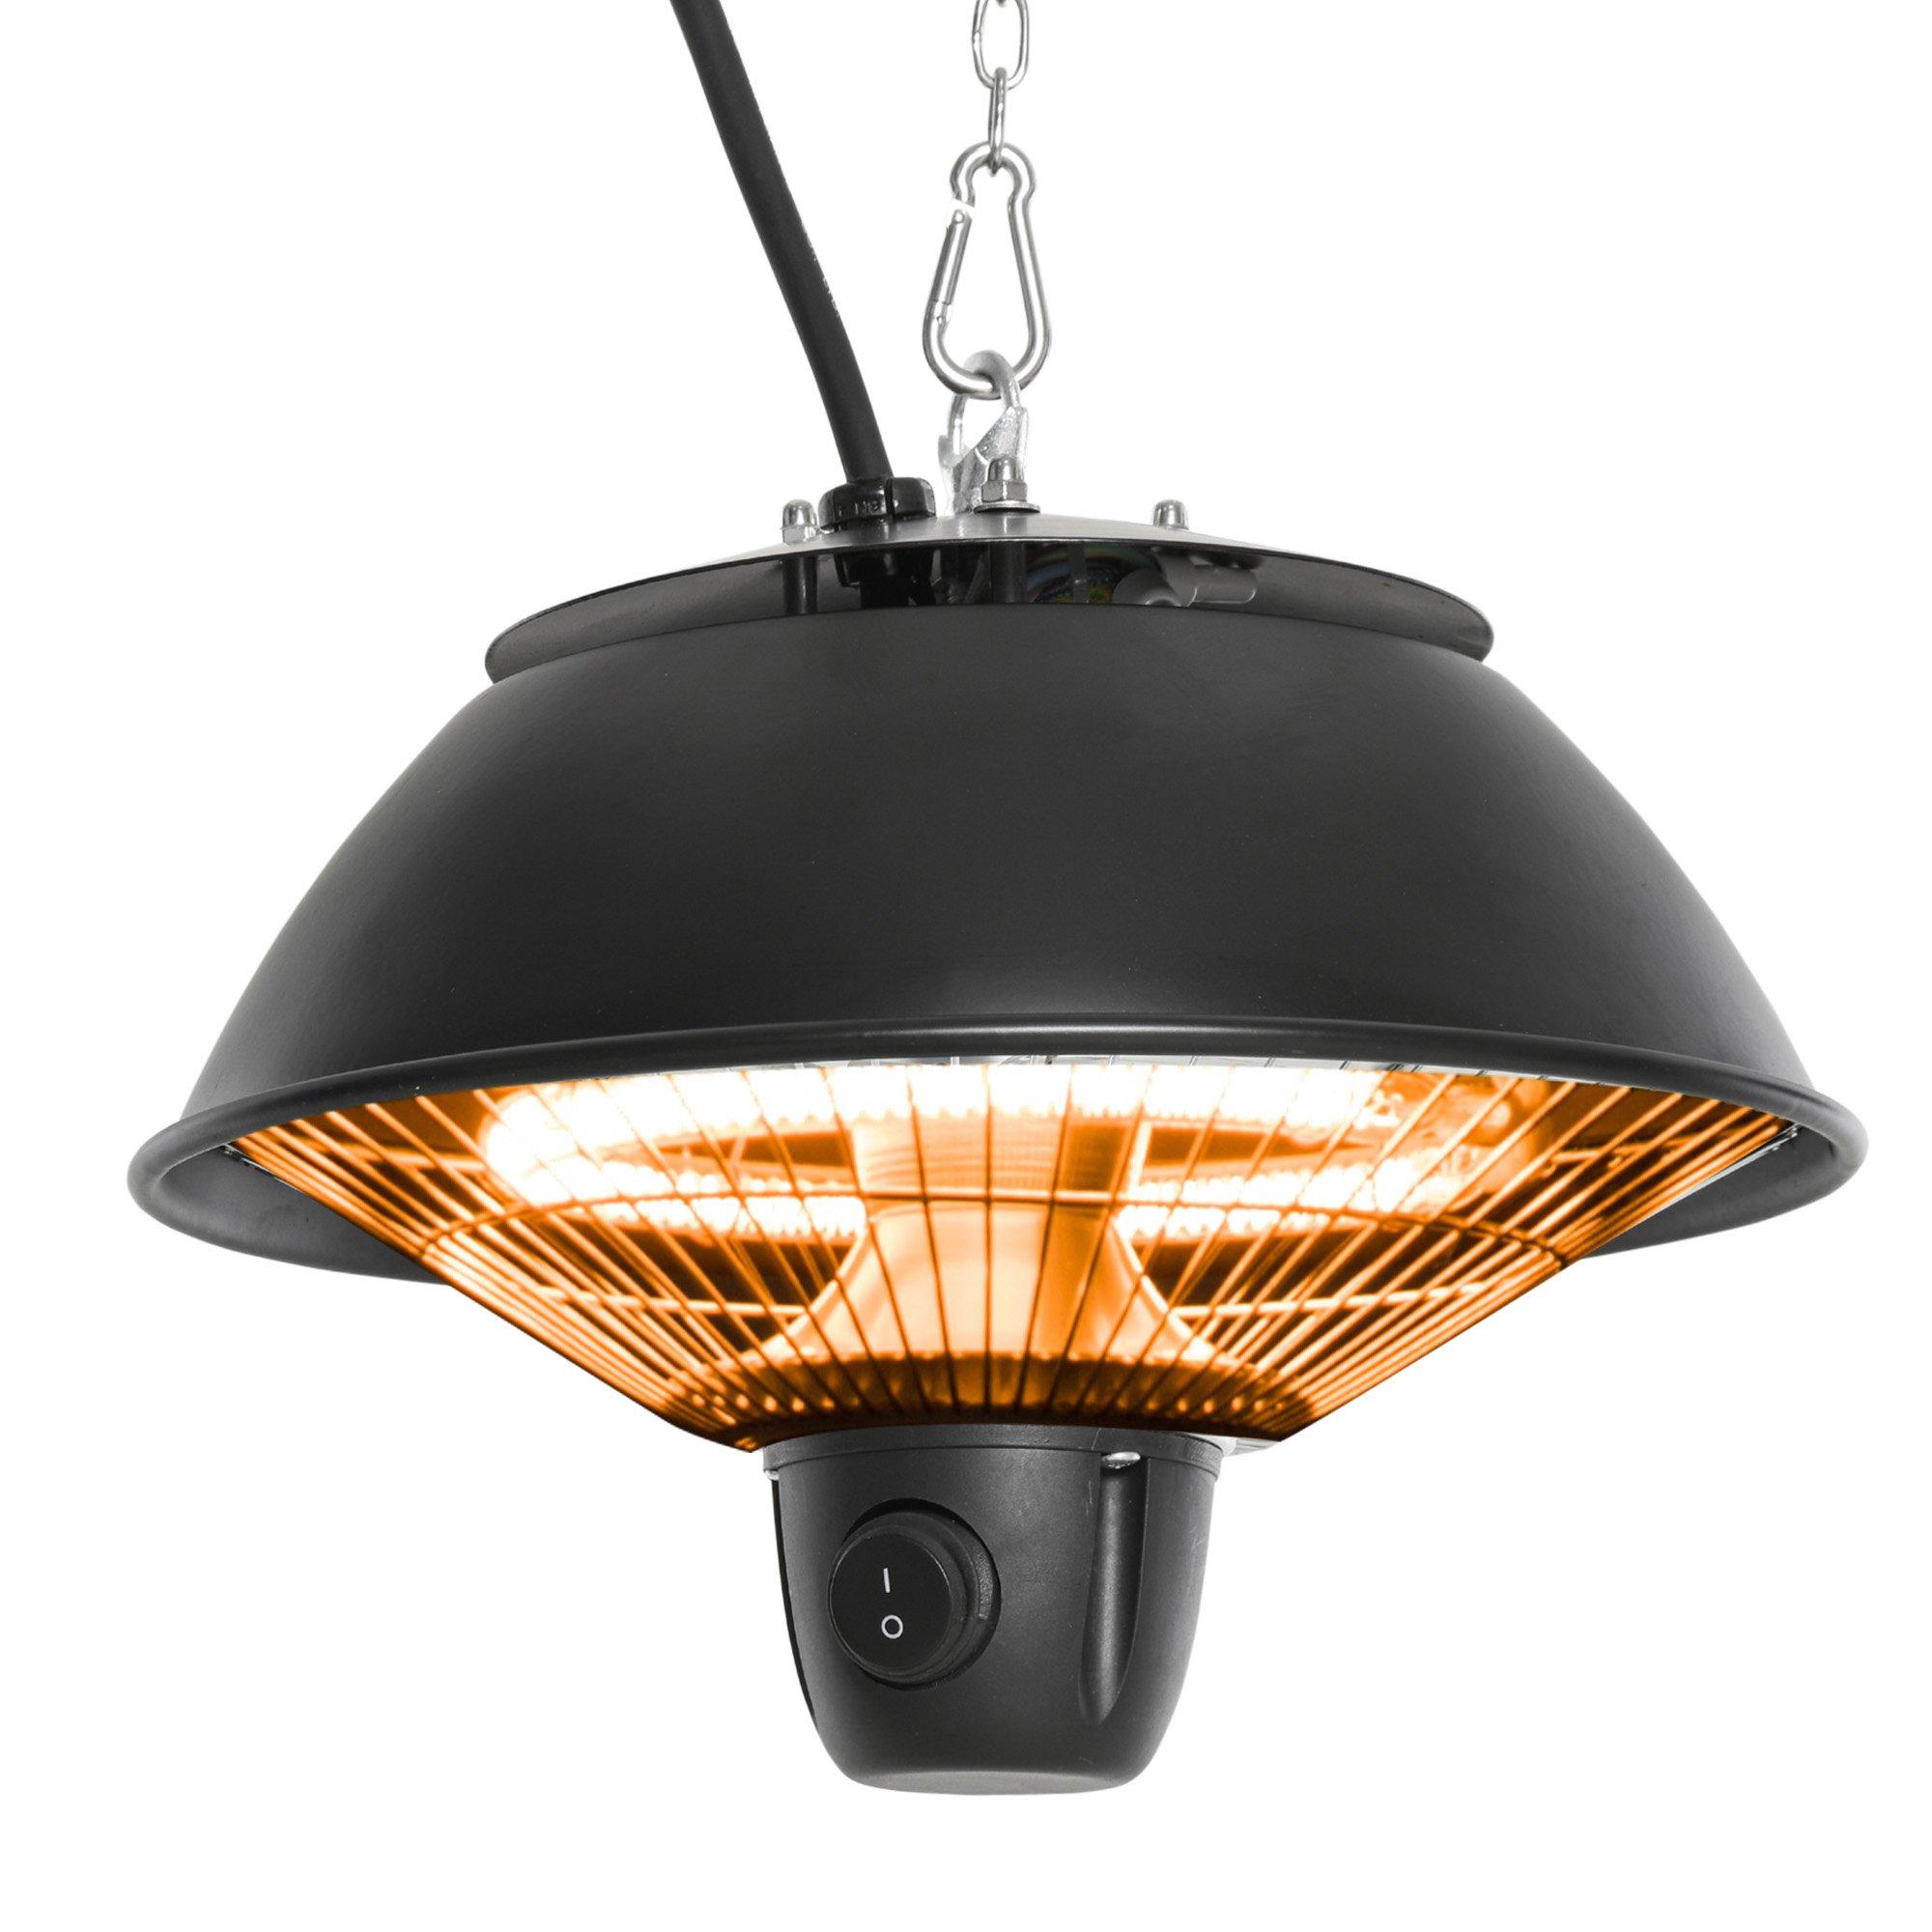 600W Electric Heater Ceiling Hanging Halogen Light w/ Hook Chain